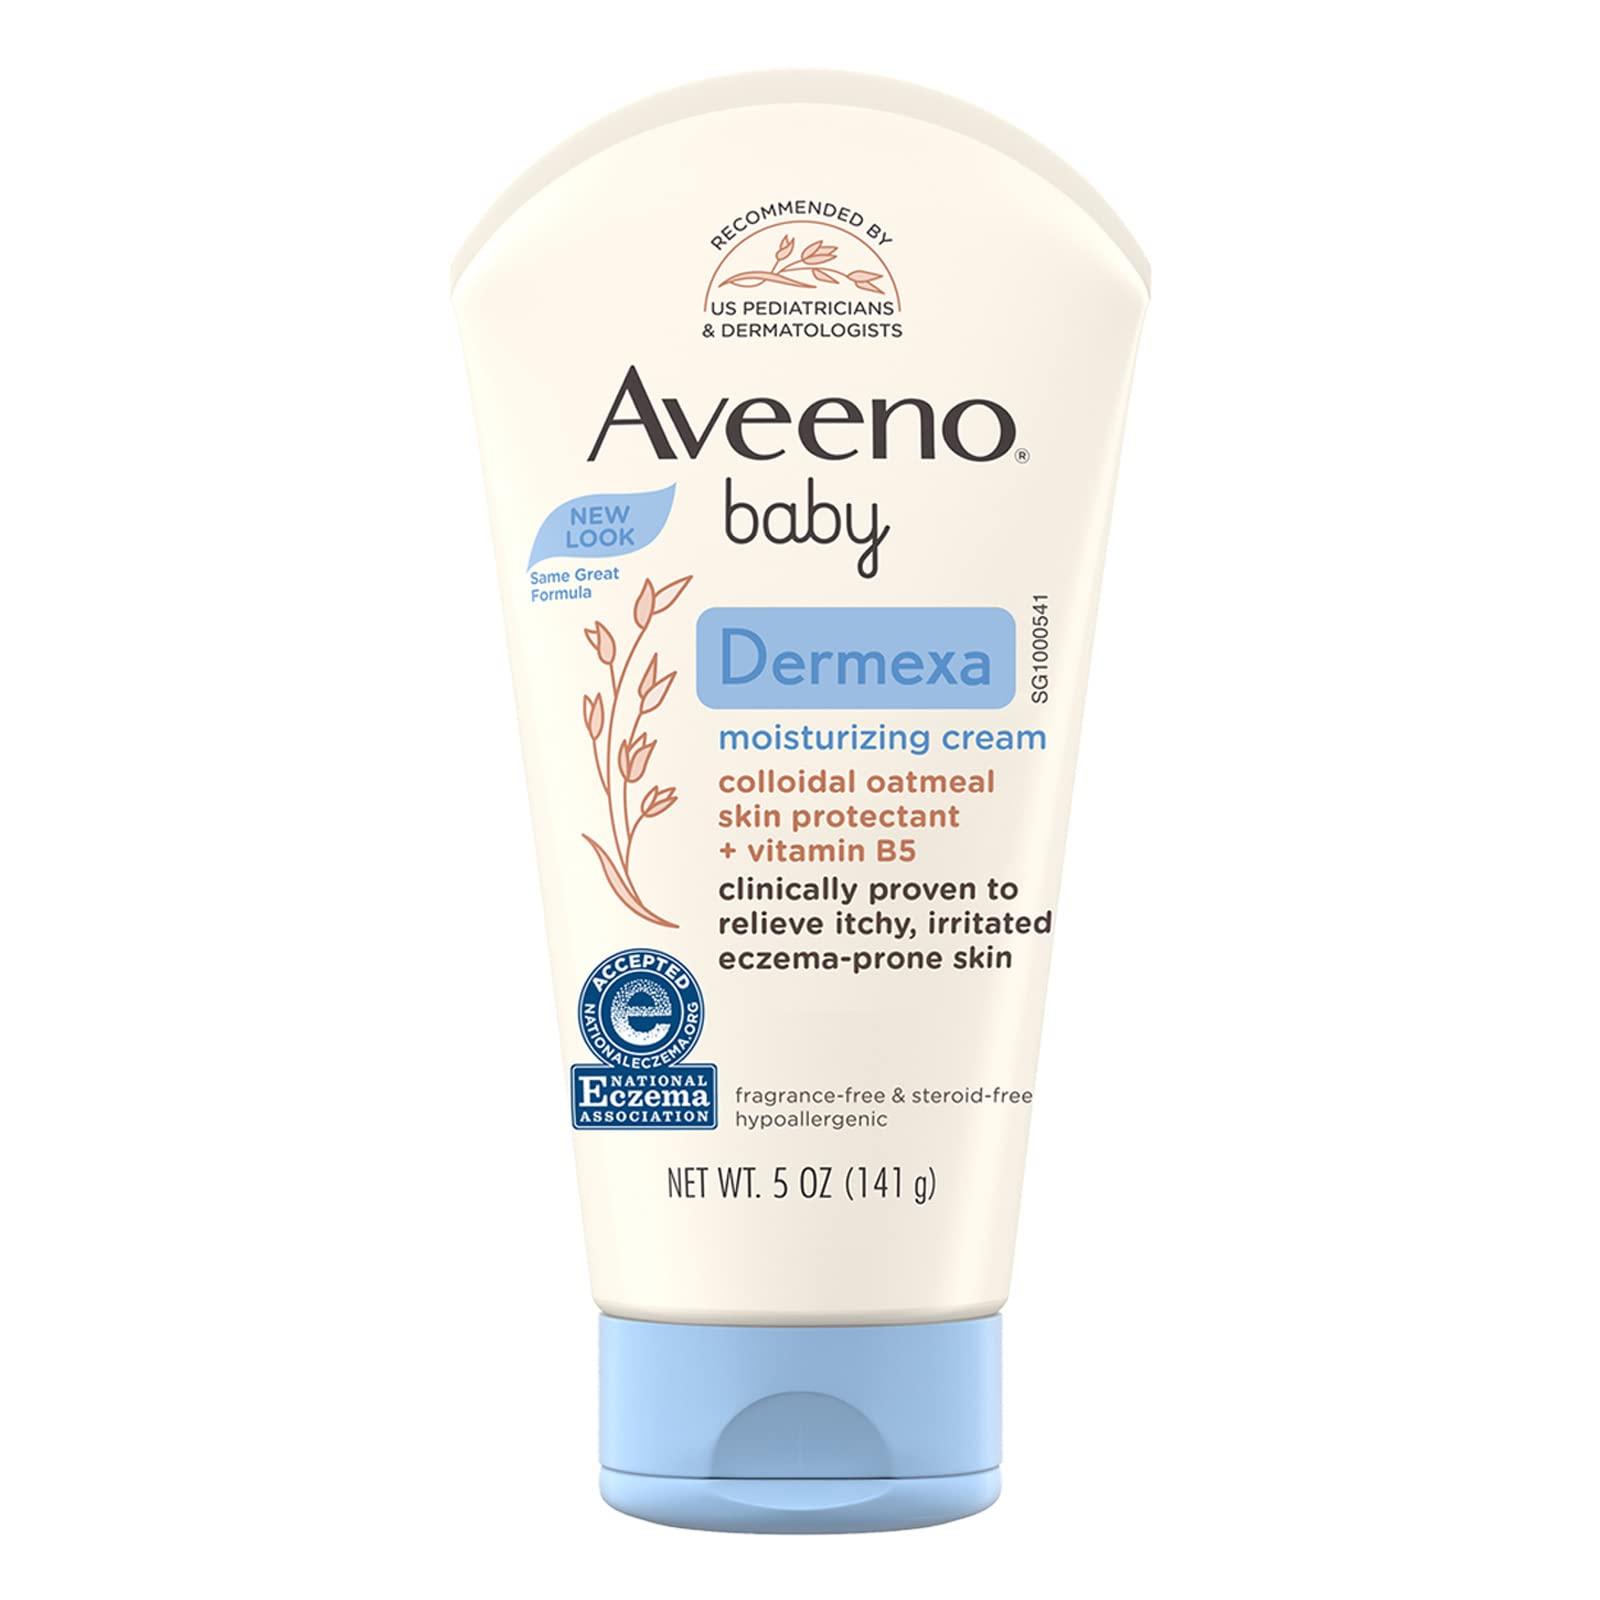 Aveeno Baby Eczema Therapy Moisturizing Cream, Natural Colloidal Oatmeal & Vitamin B5, Baby Eczema Cream for Dry, Itchy, Irritated Skin Due to Eczema, Paraben- & Steroid-Free, 5 fl. oz